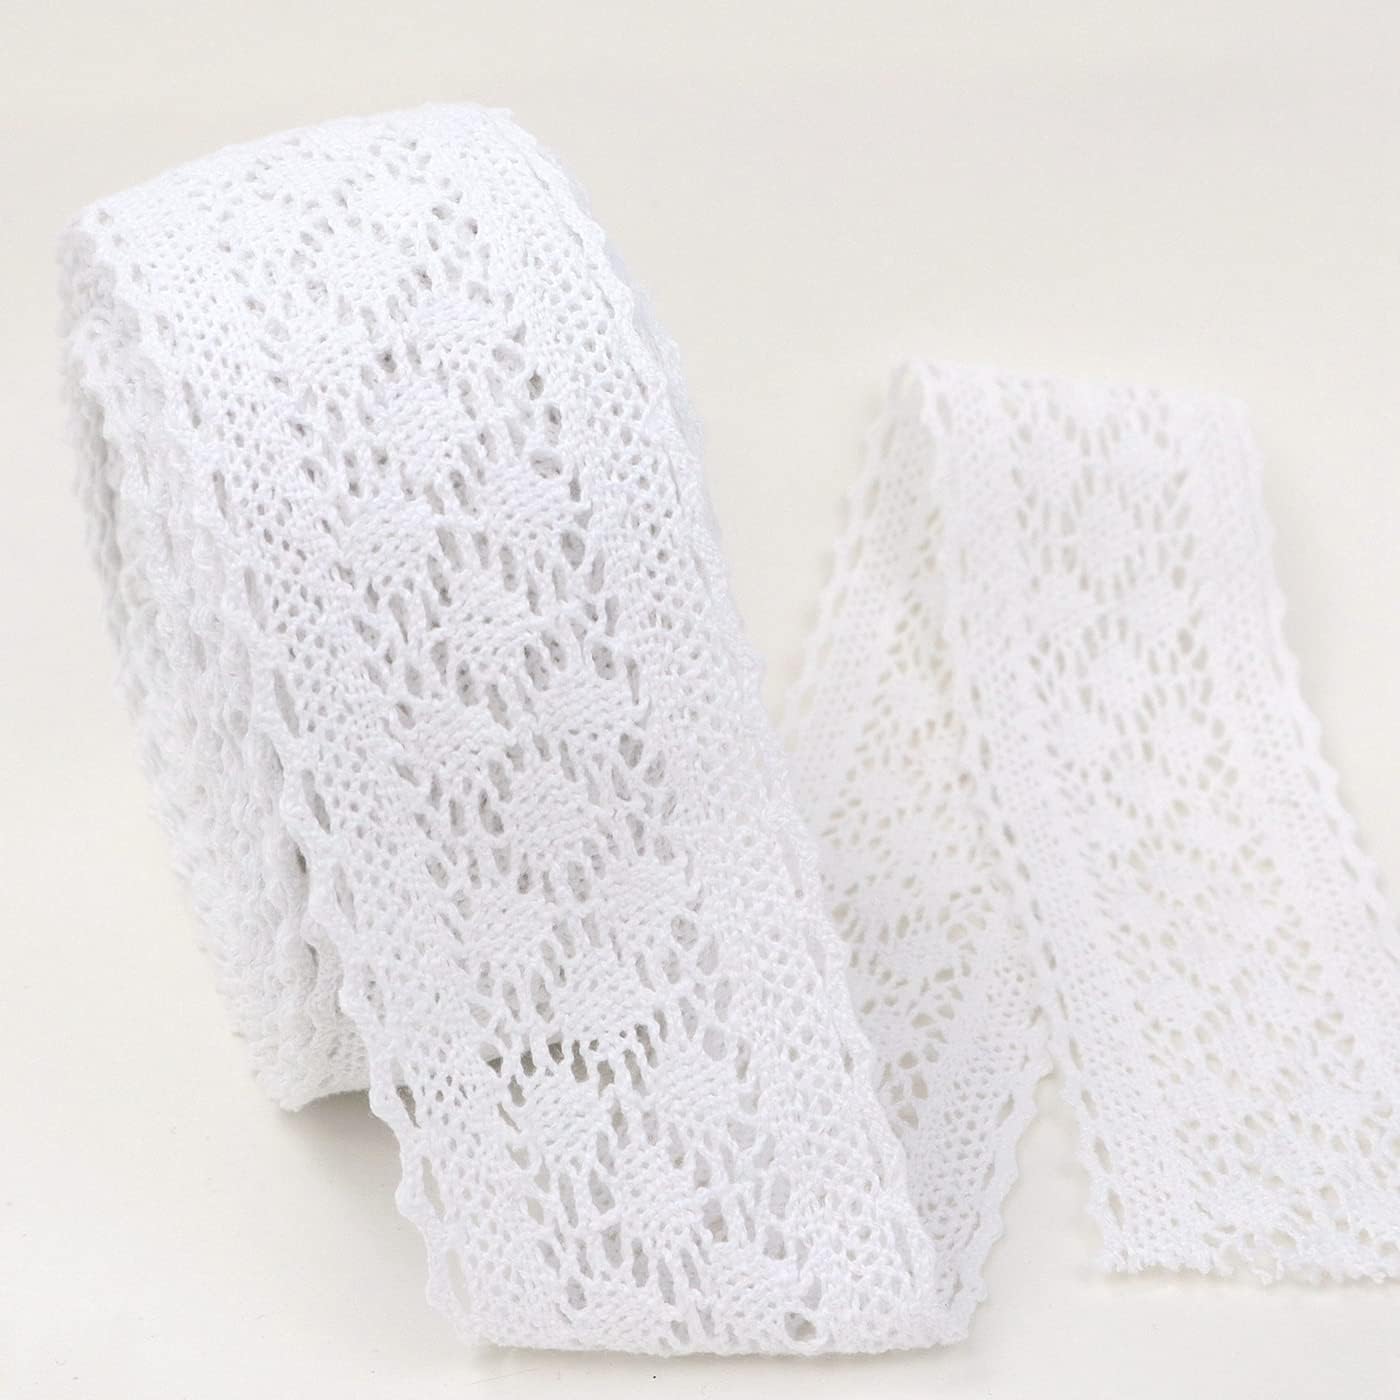 LEMO White Lace Ribbon 10 Yards Cotton Lace Trim Crochet Sewing Lace for Crafts, Gift Package Wrapping, Bridal Wedding Decoration